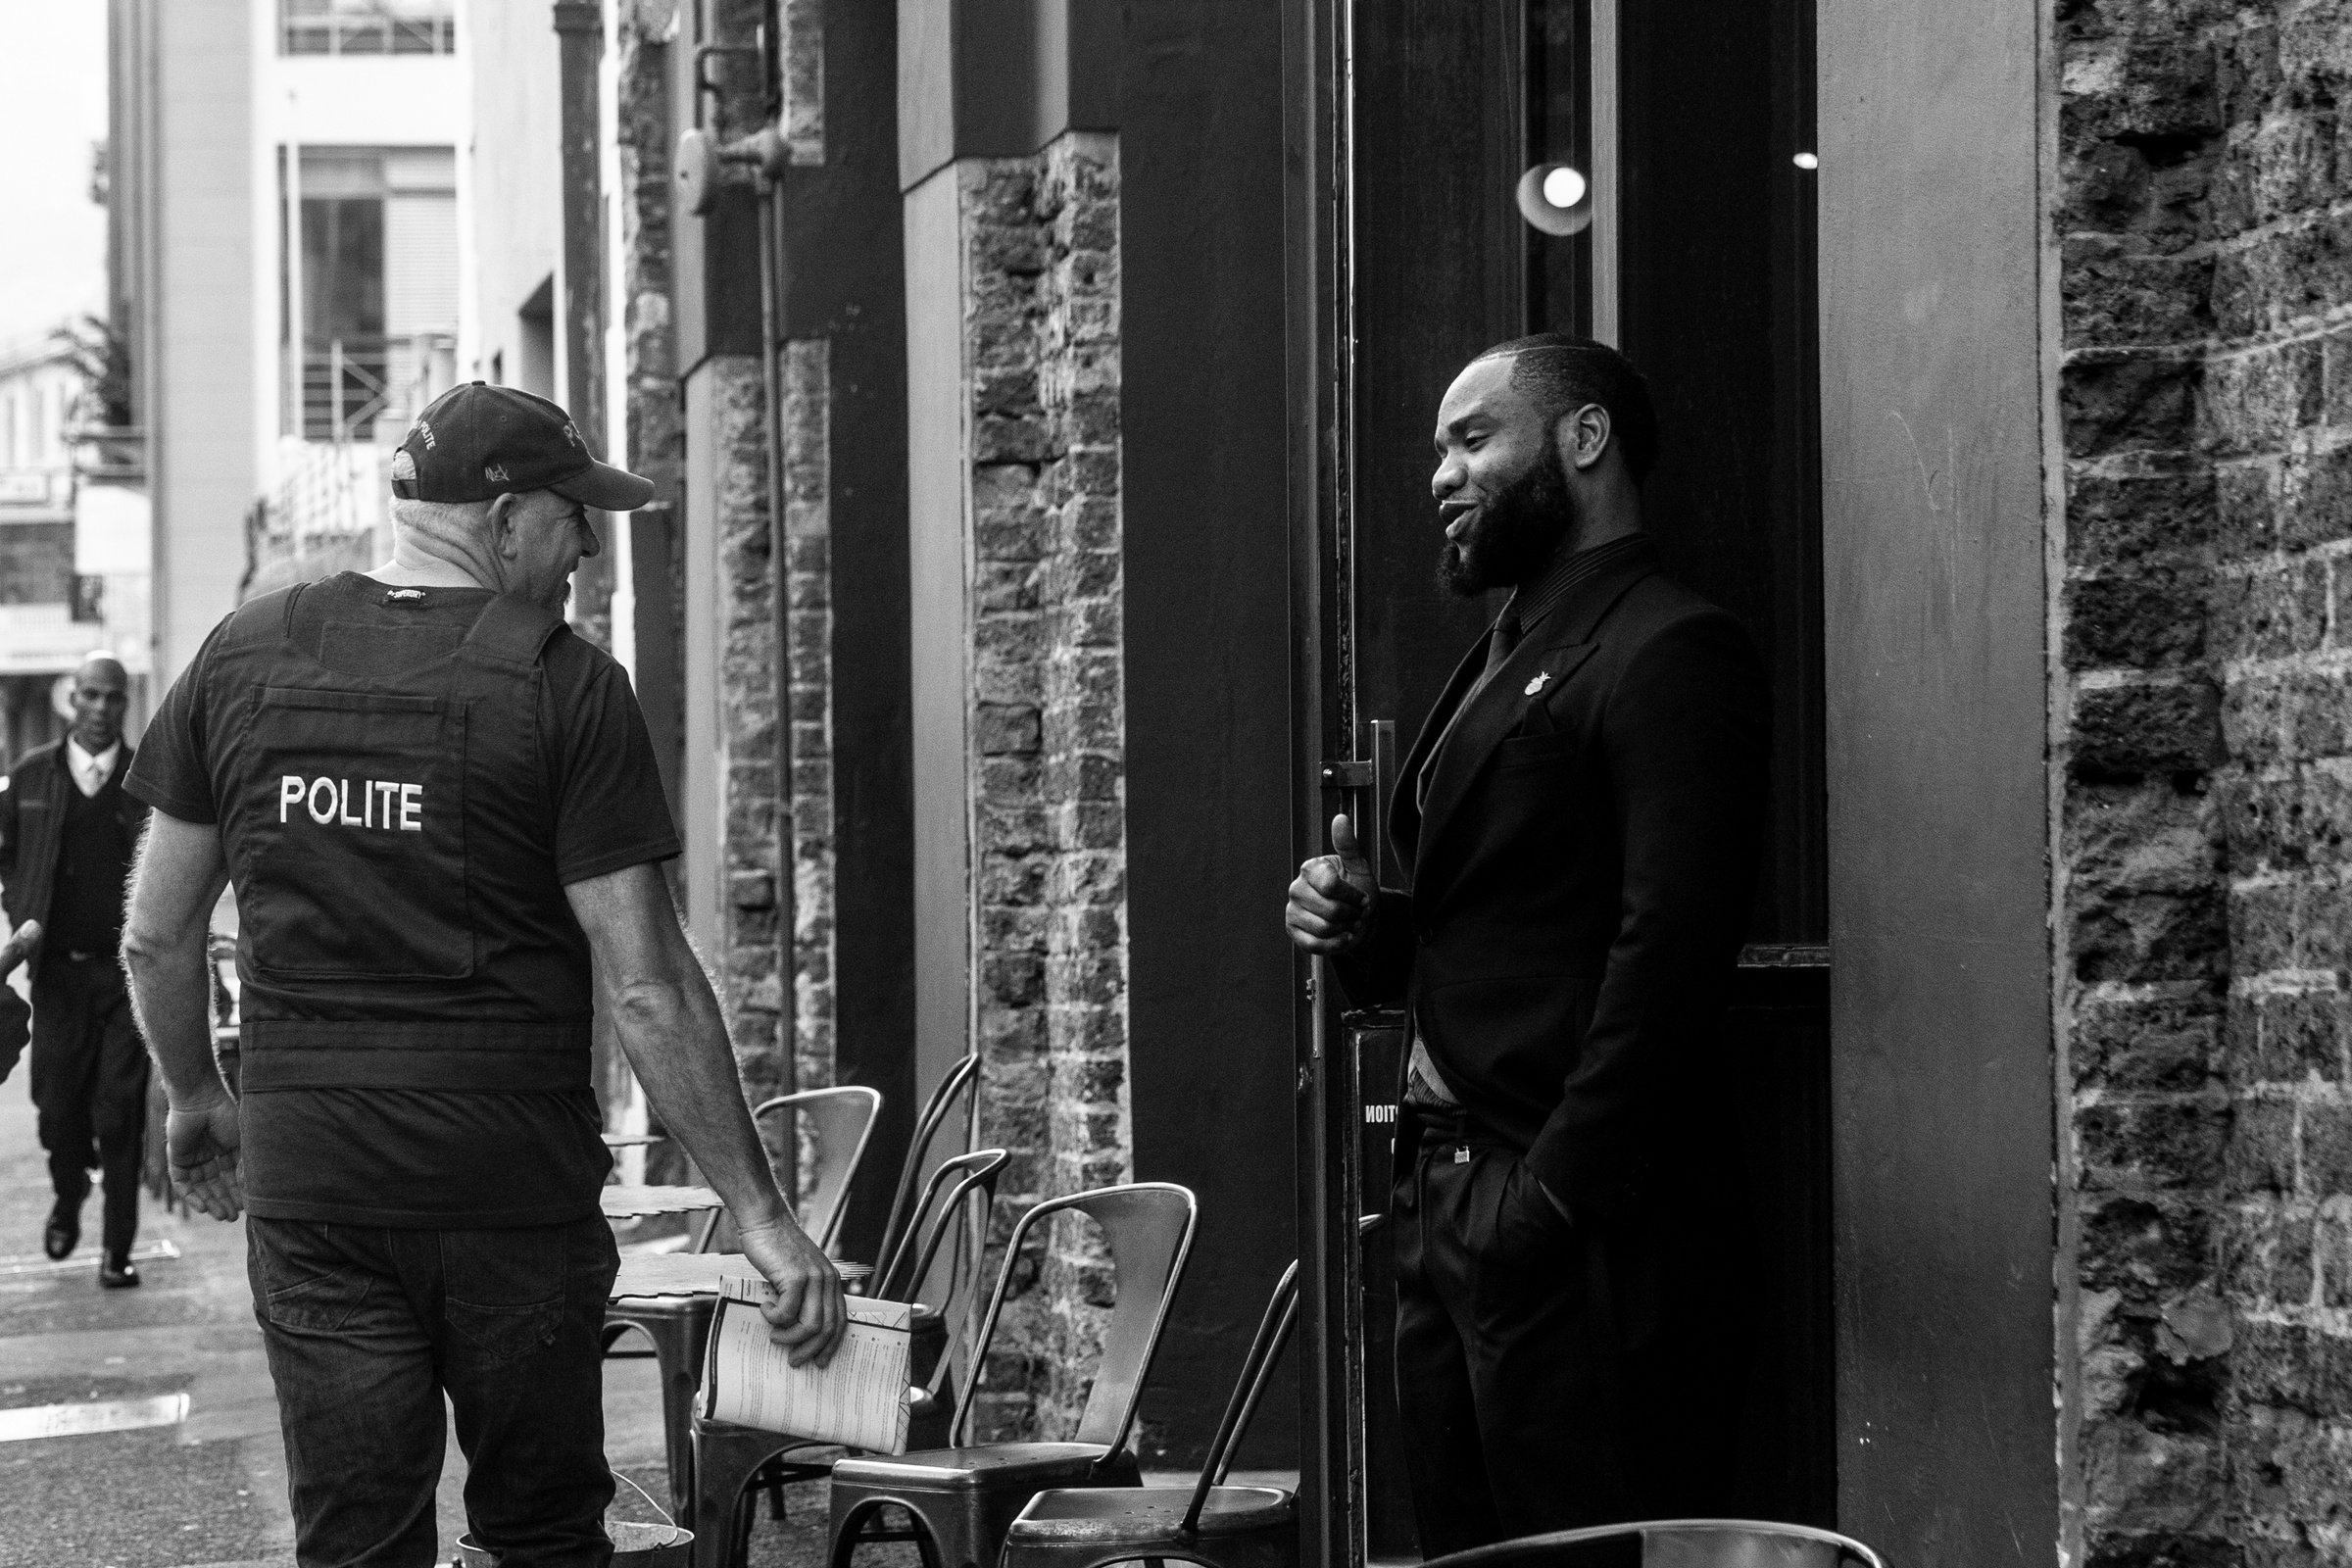 Monochrome process photograph from the 2019 rendition of Christian Nerf’s performance piece ‘Polite Force.’ On the left, a participant dressed in Polite Force riot gear is walking down a street in Cape Town. On the right, a employee of a business posted outside the entrance gives the participant a thumbs-up.
